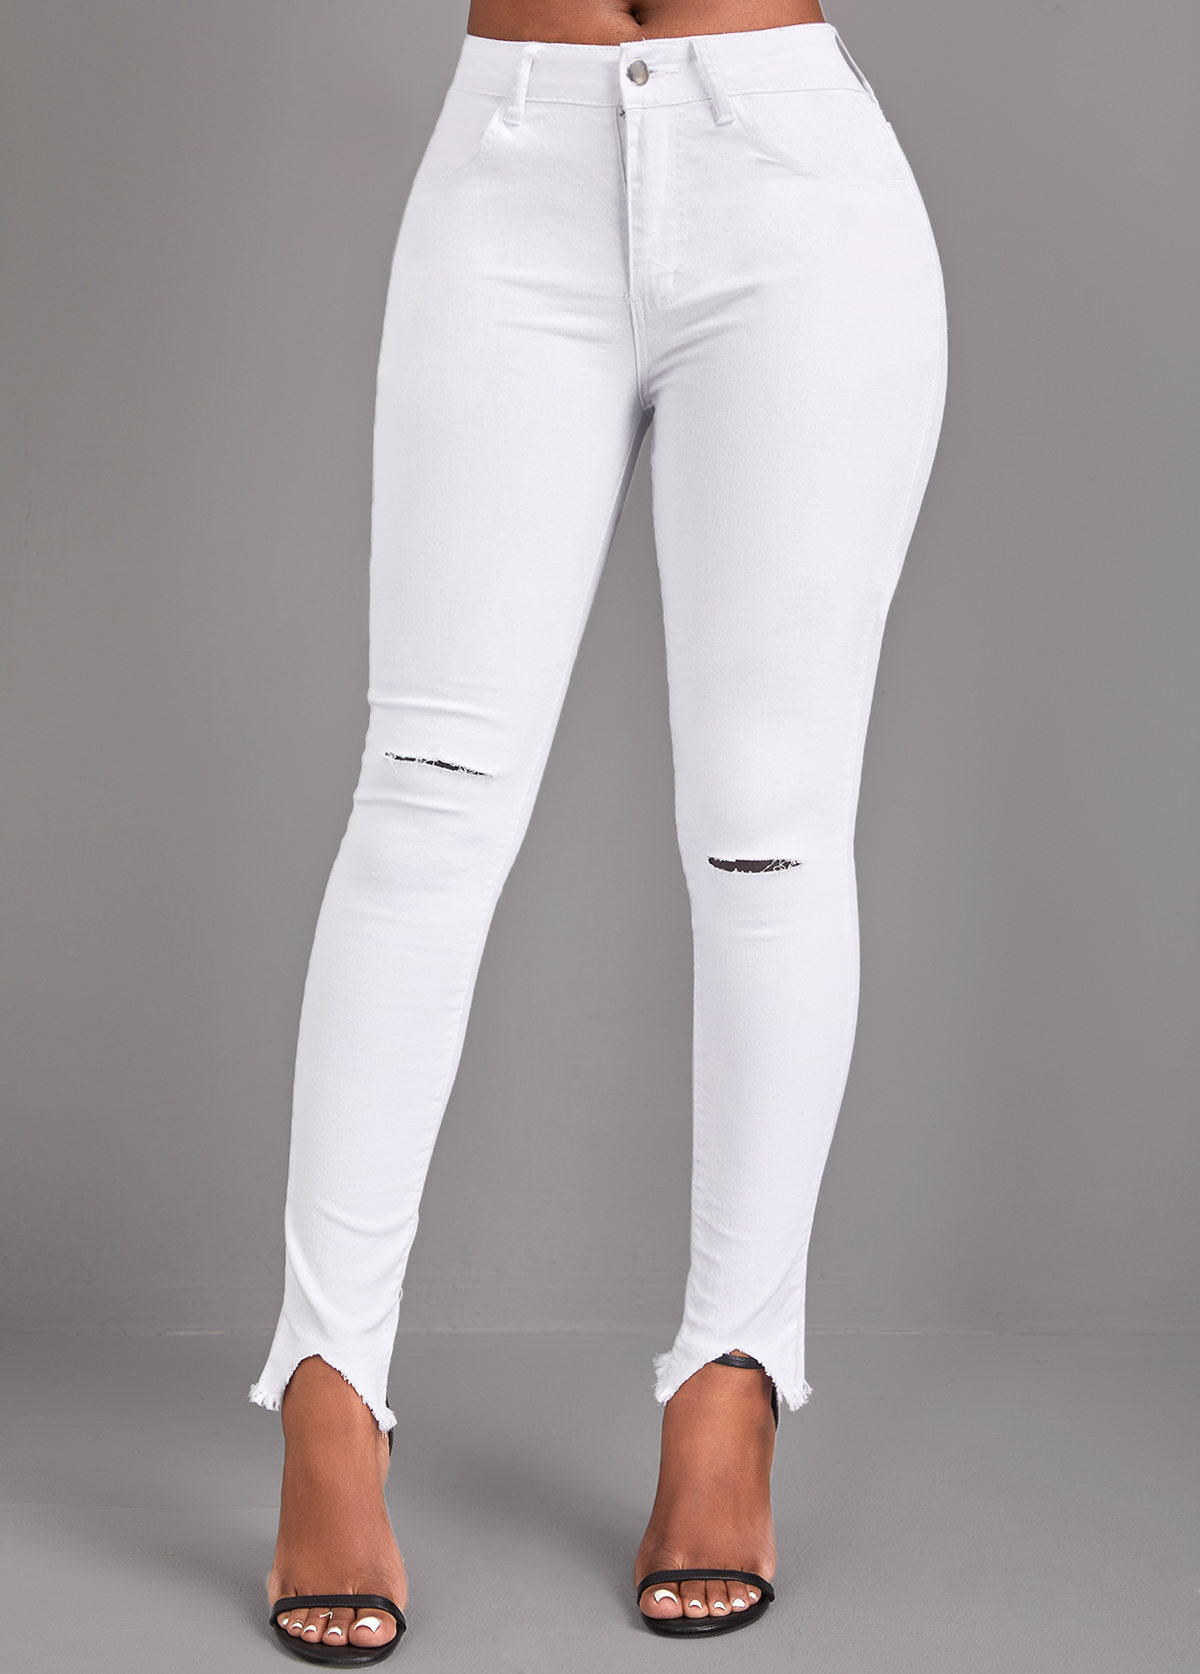 Button White Skinny High Waisted Jeans